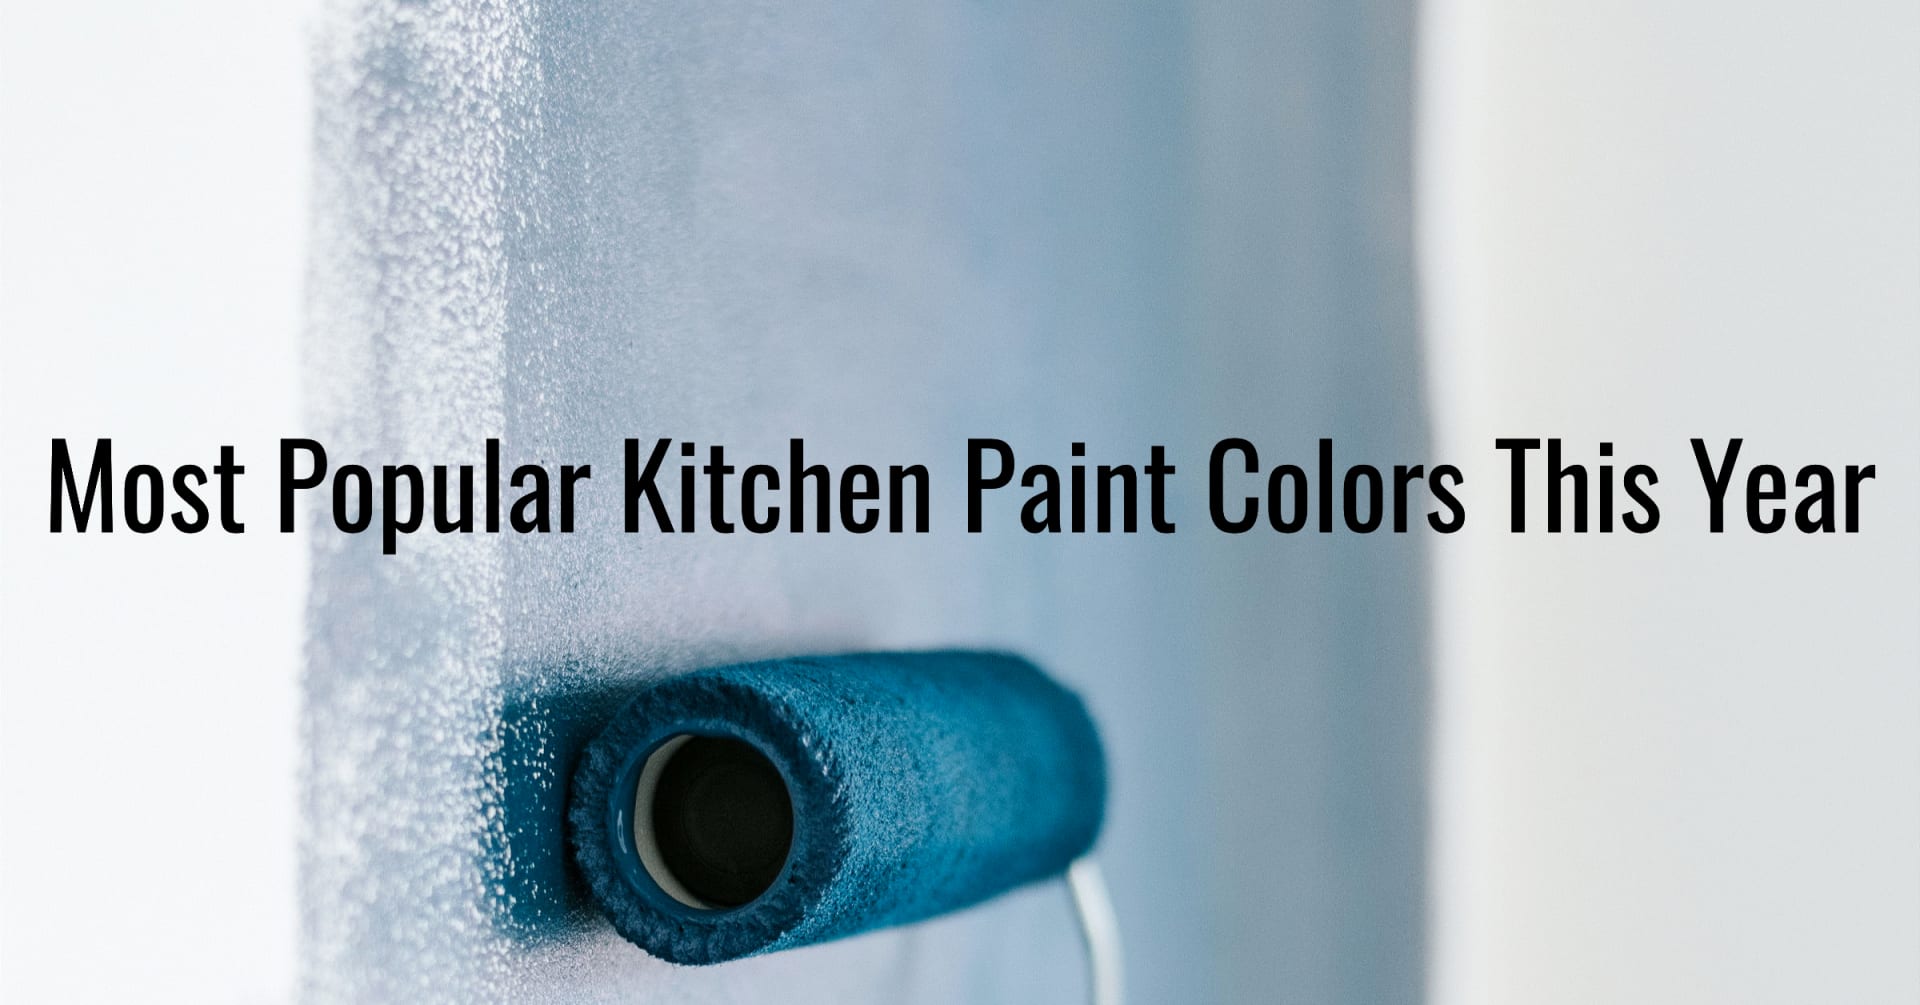 Kitchen cabinet paint colors - Most popular kitchen paint colors this year header image